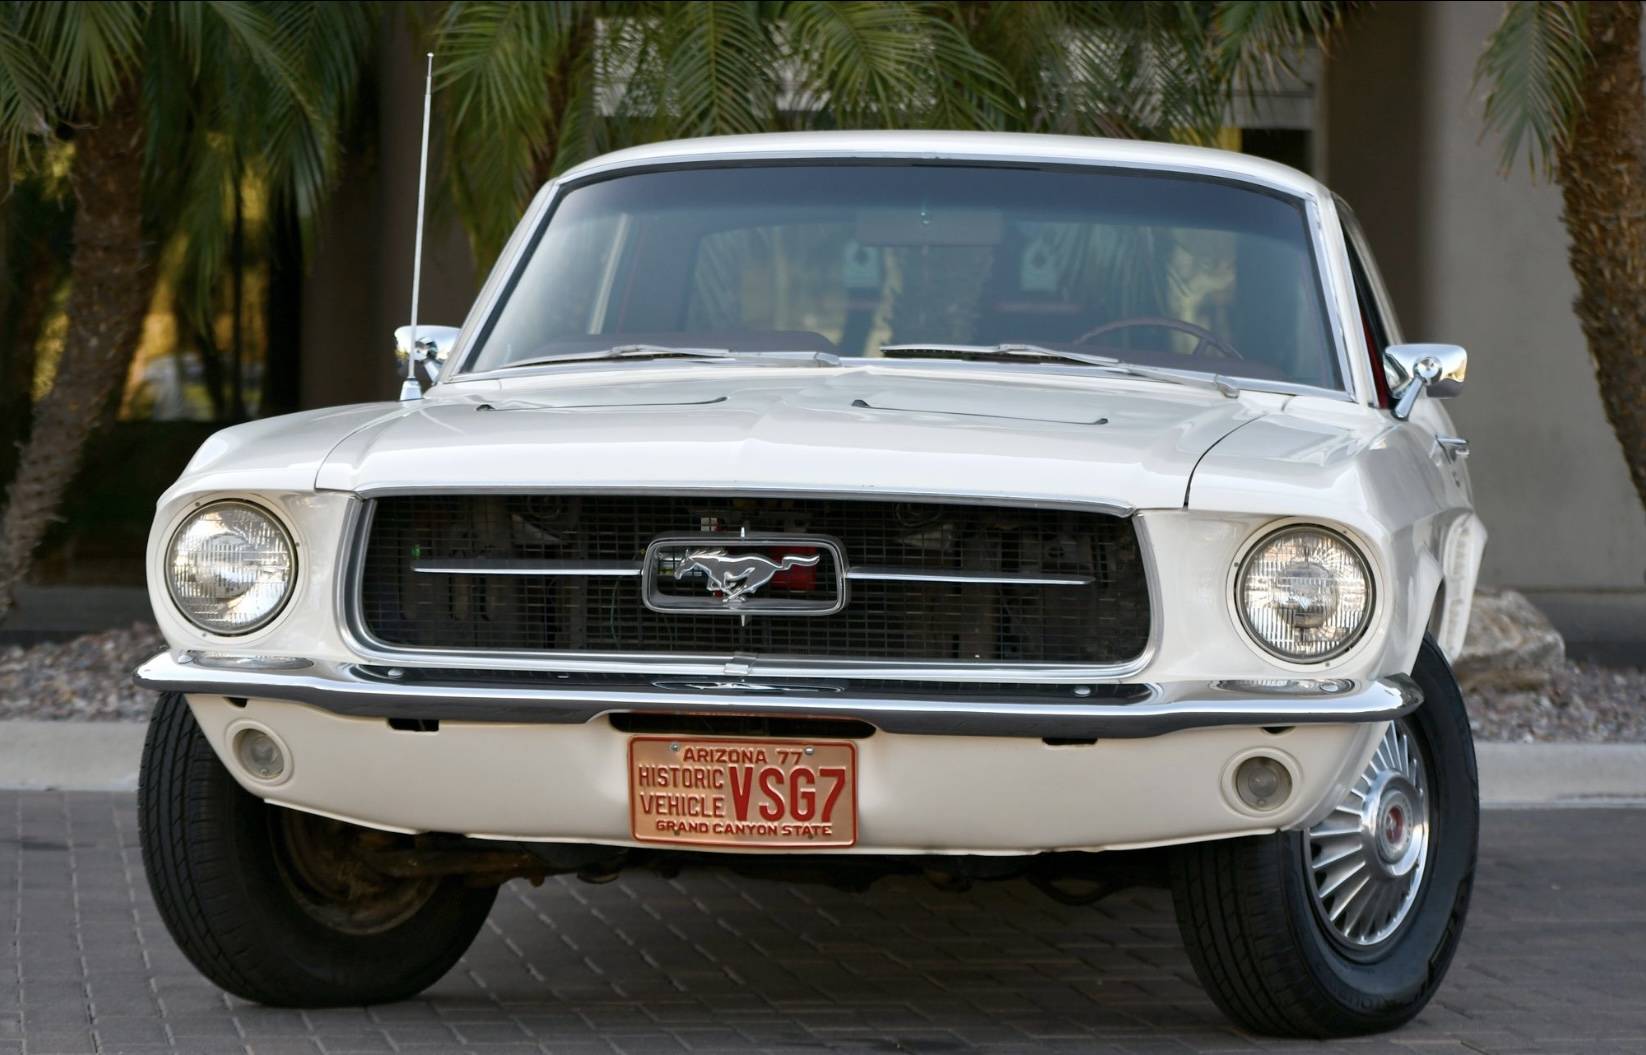 Ford Mustang 289